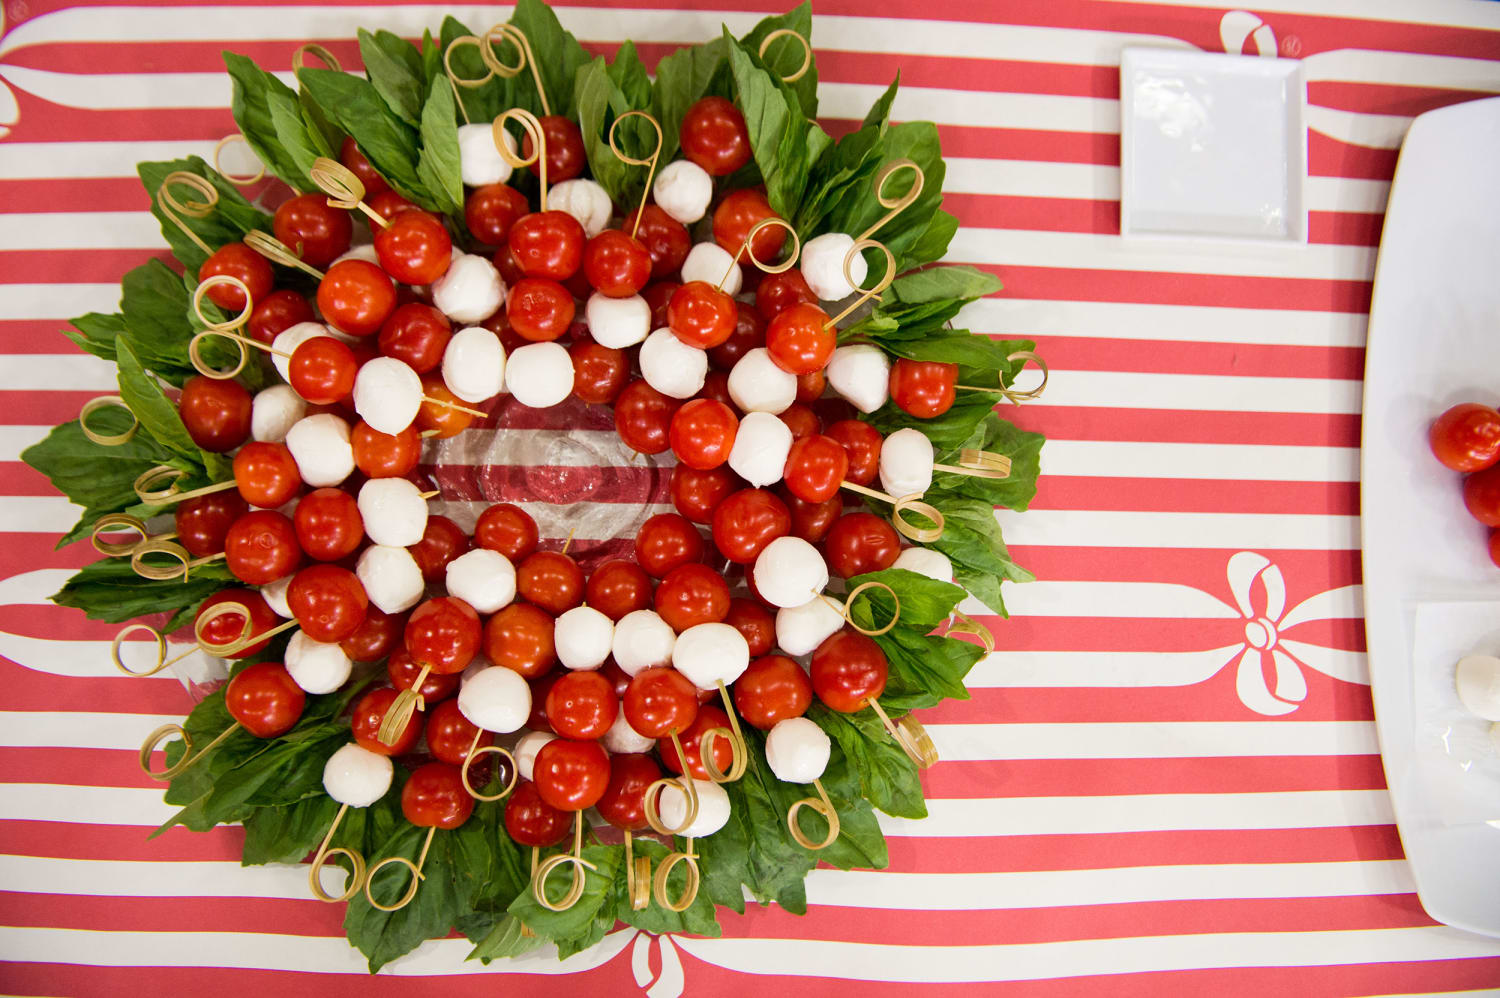 7 easy holiday party hacks for food and decorations ...